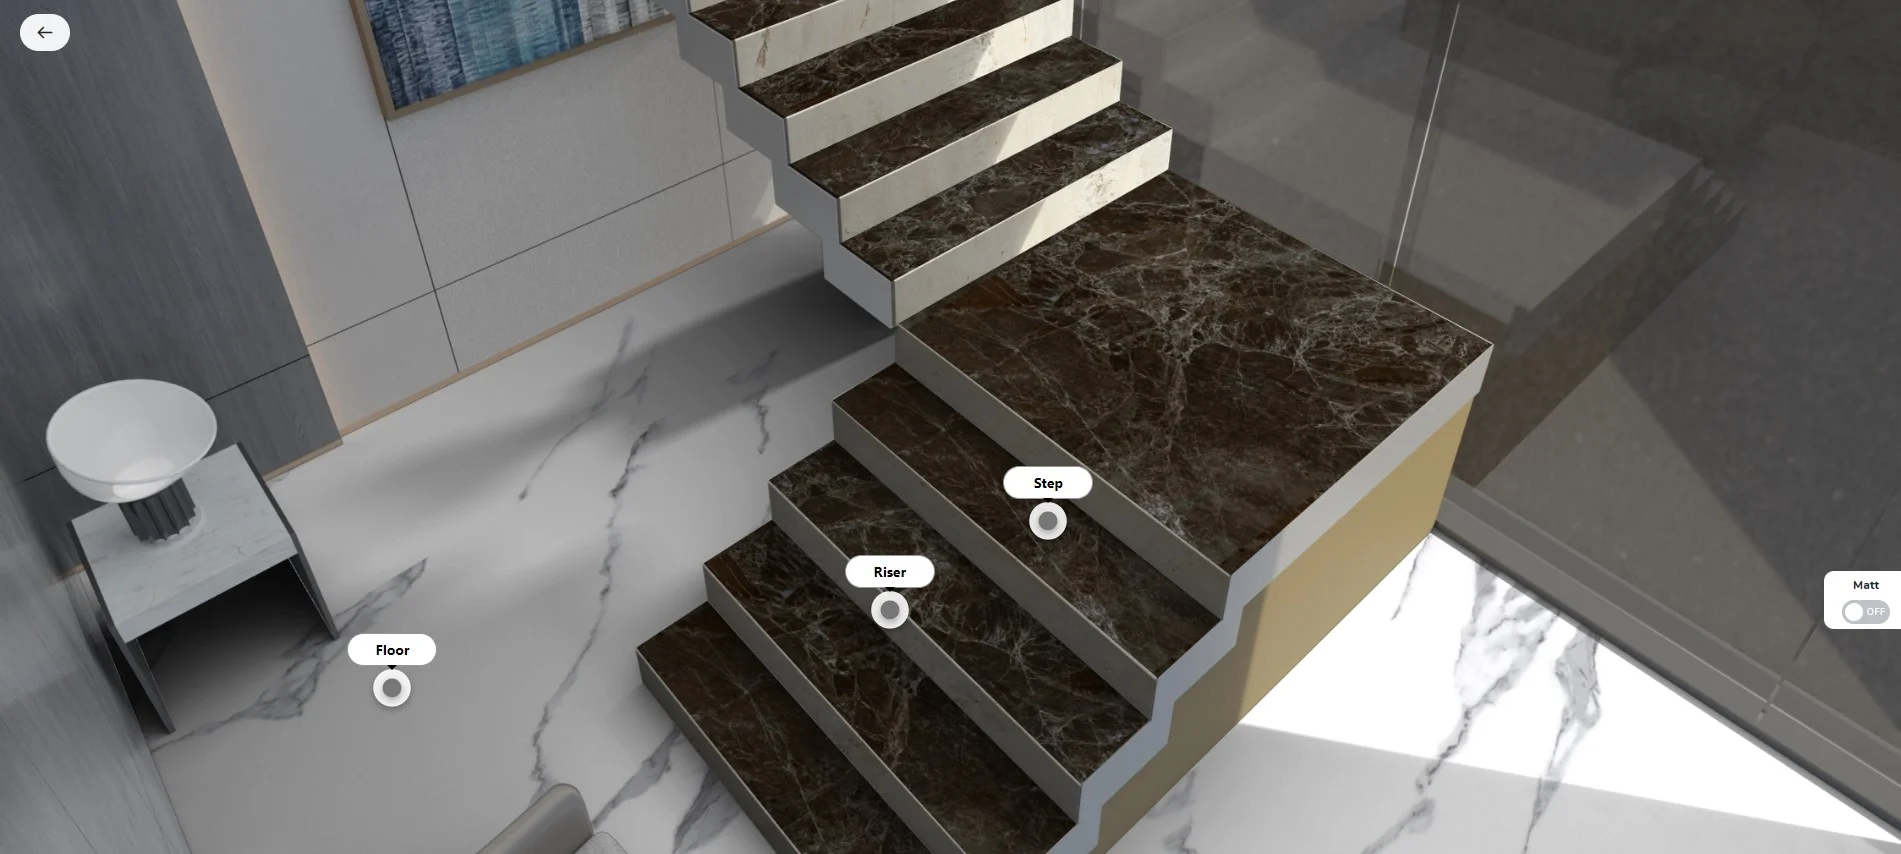 Key Features for Step Riser Tile Visualizer